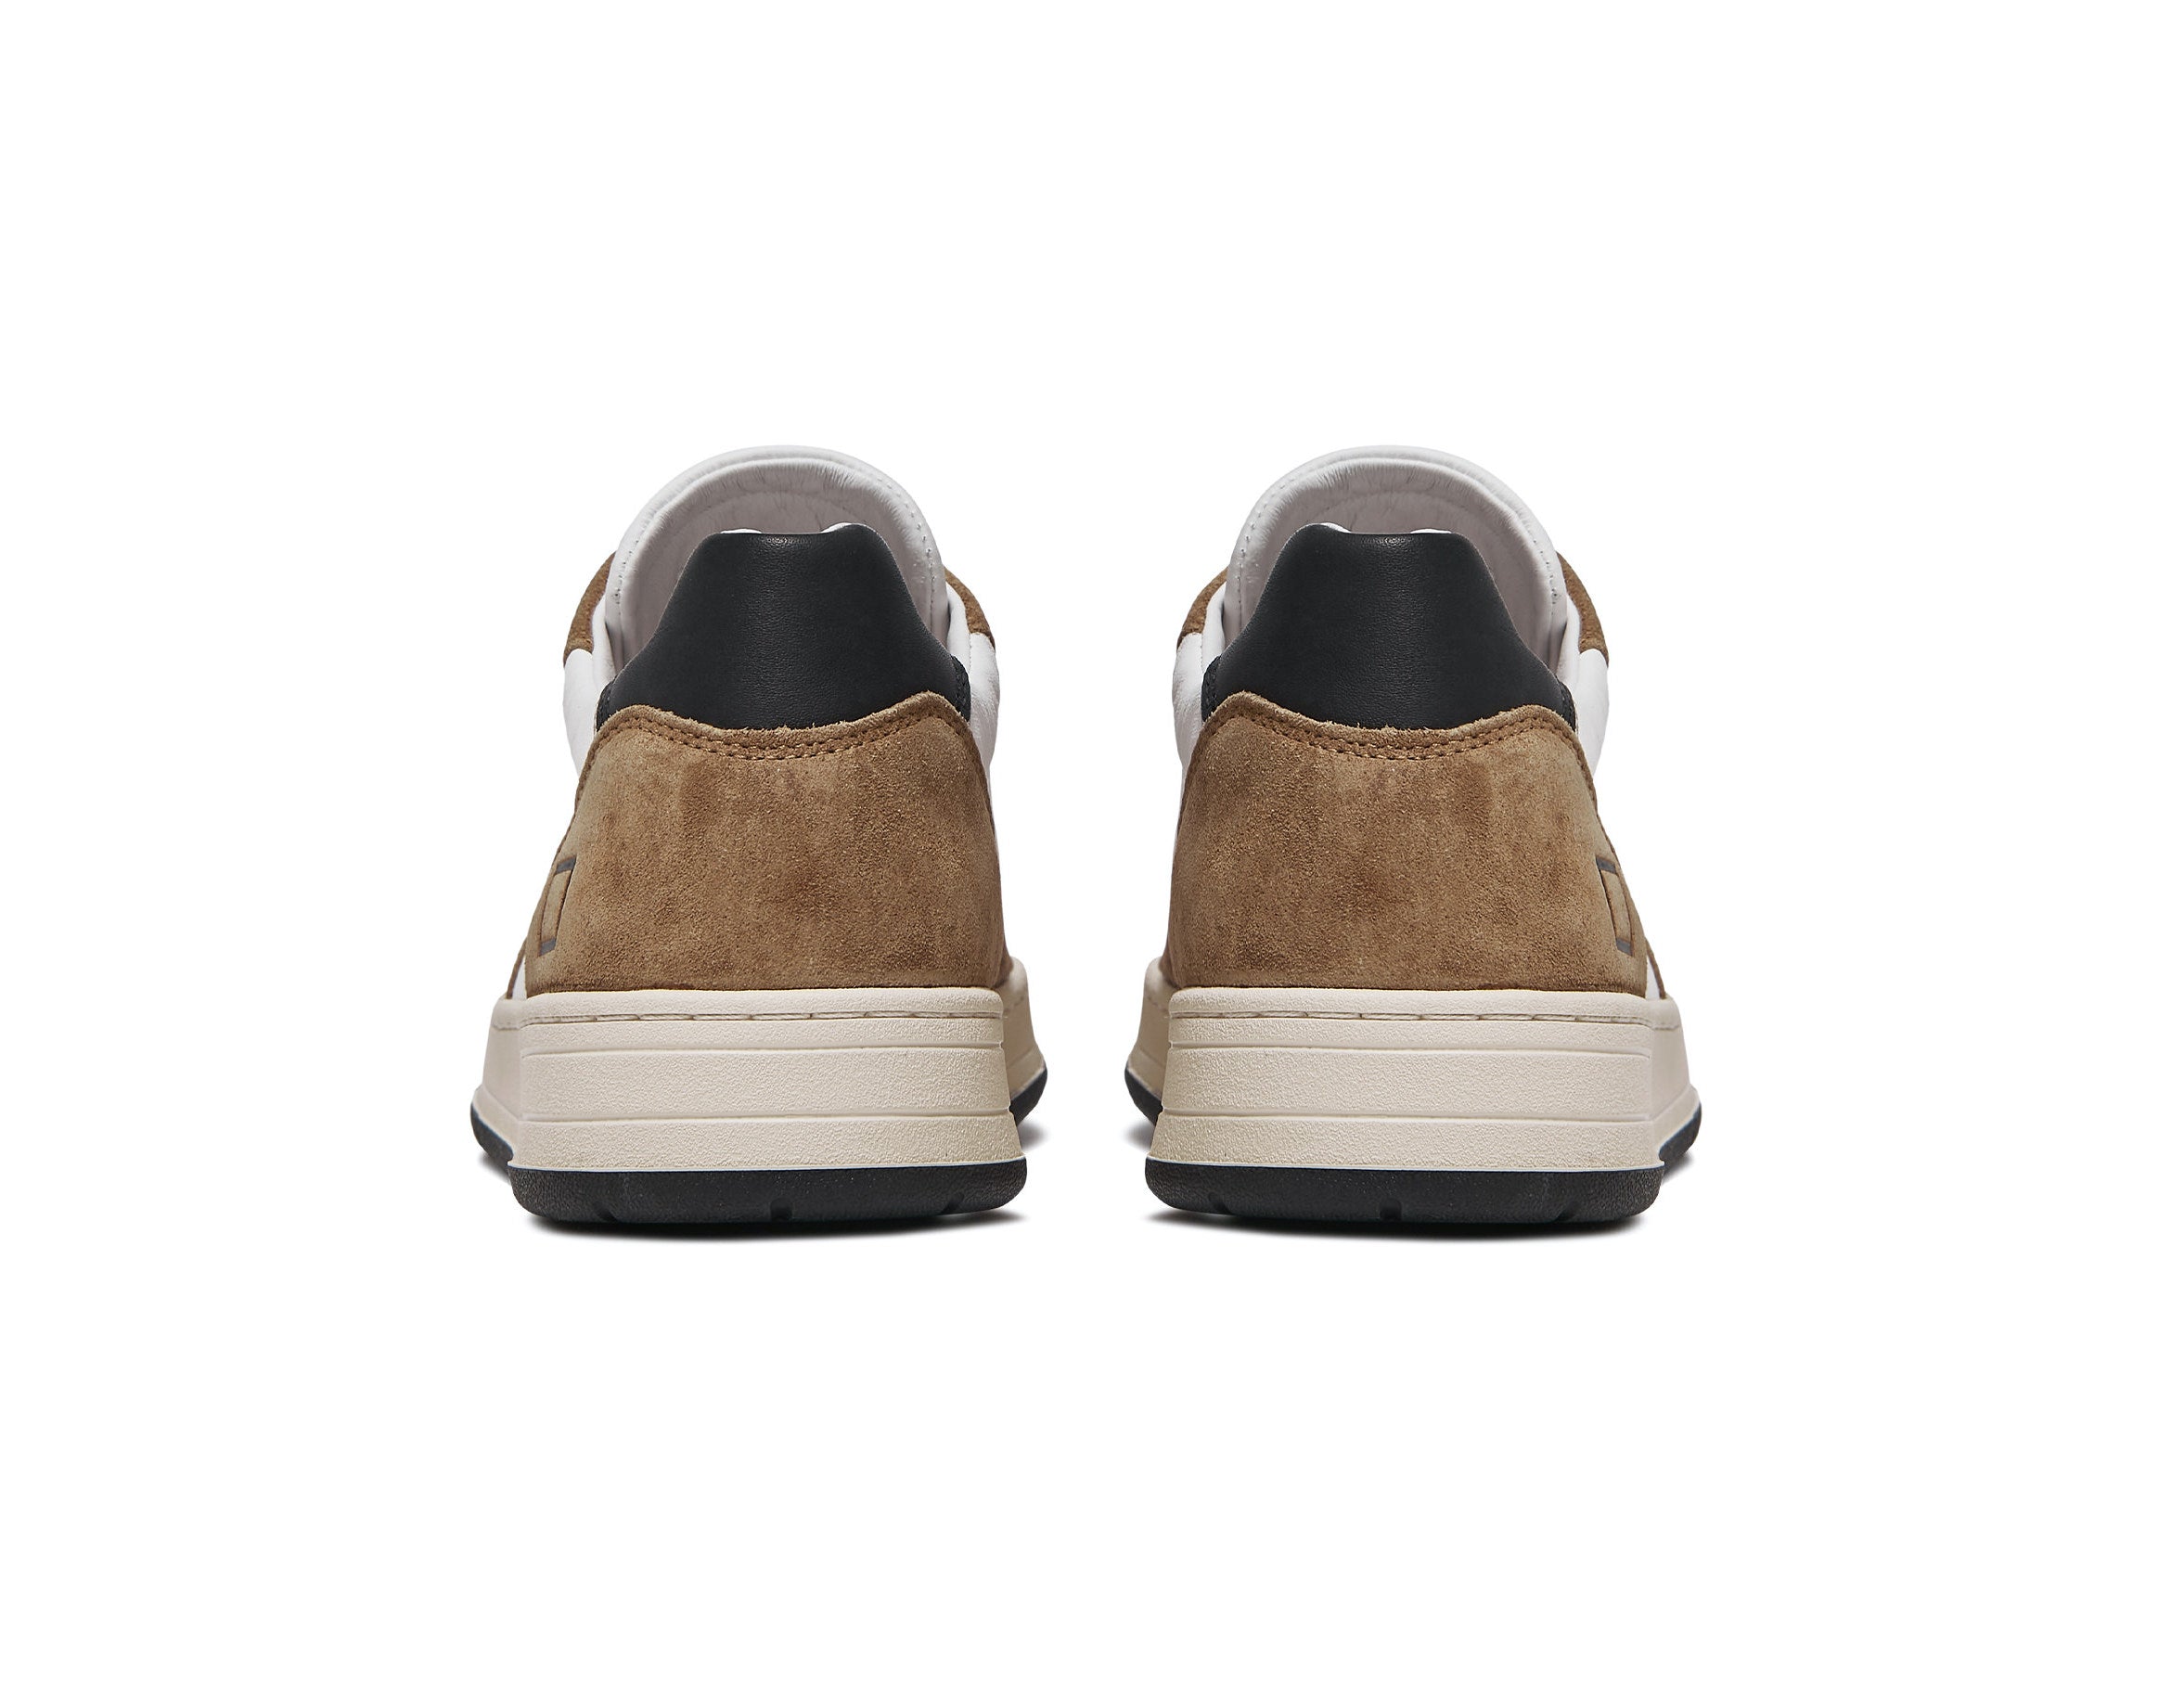 Sneaker D.A.T.E. COURT LEATHER WHITE-CAMEL